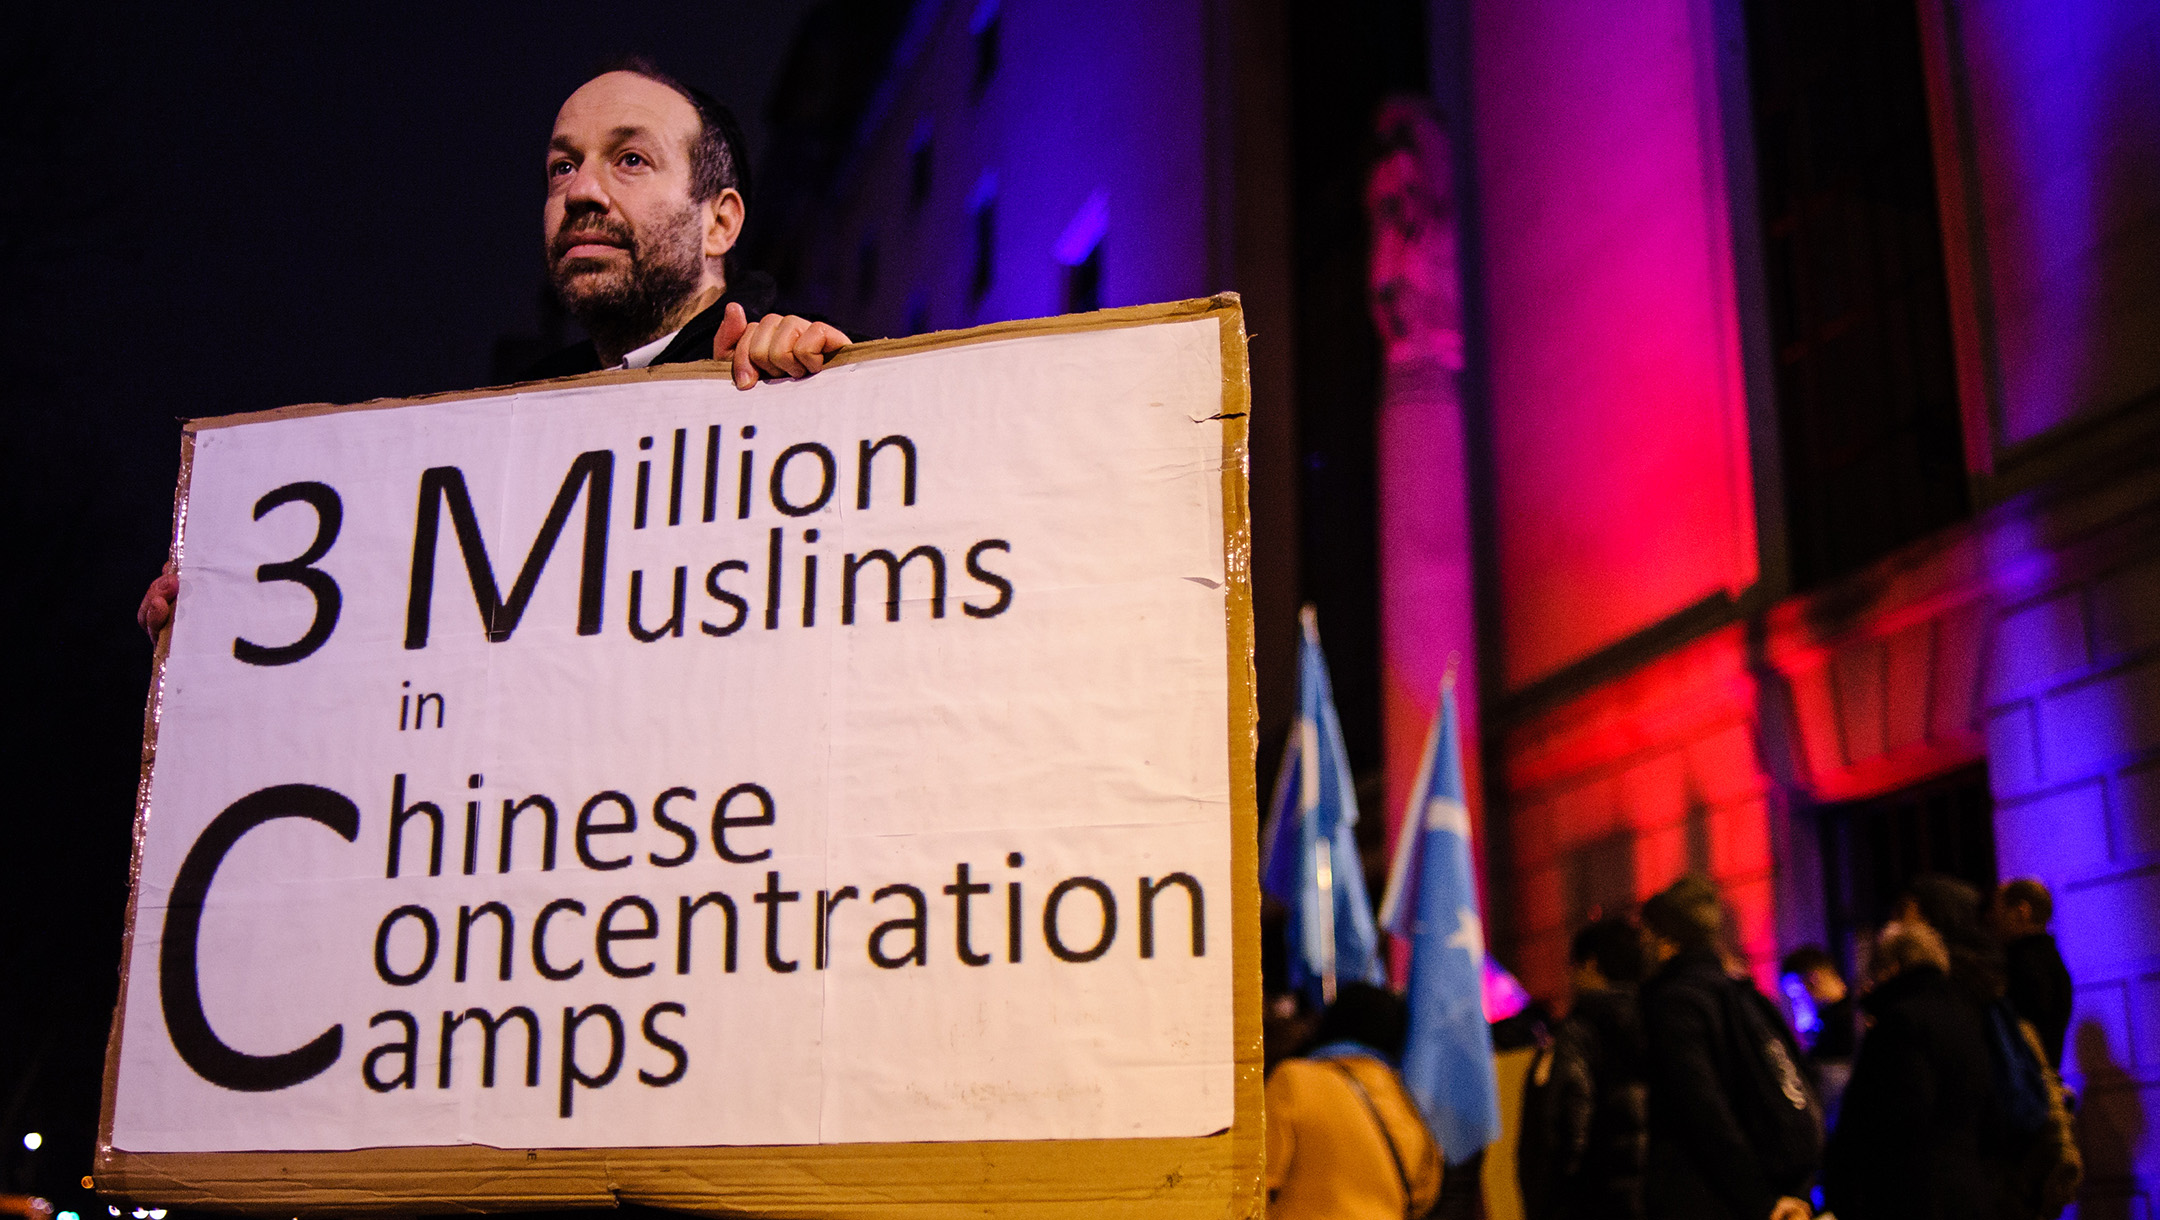 A Jewish man who identified himself as Andrew protests the oppression of China's Uyghurs outside the Chinese embassy in London, UK on Jan. 5, 2020. (David Cliff/NurPhoto via Getty Images)